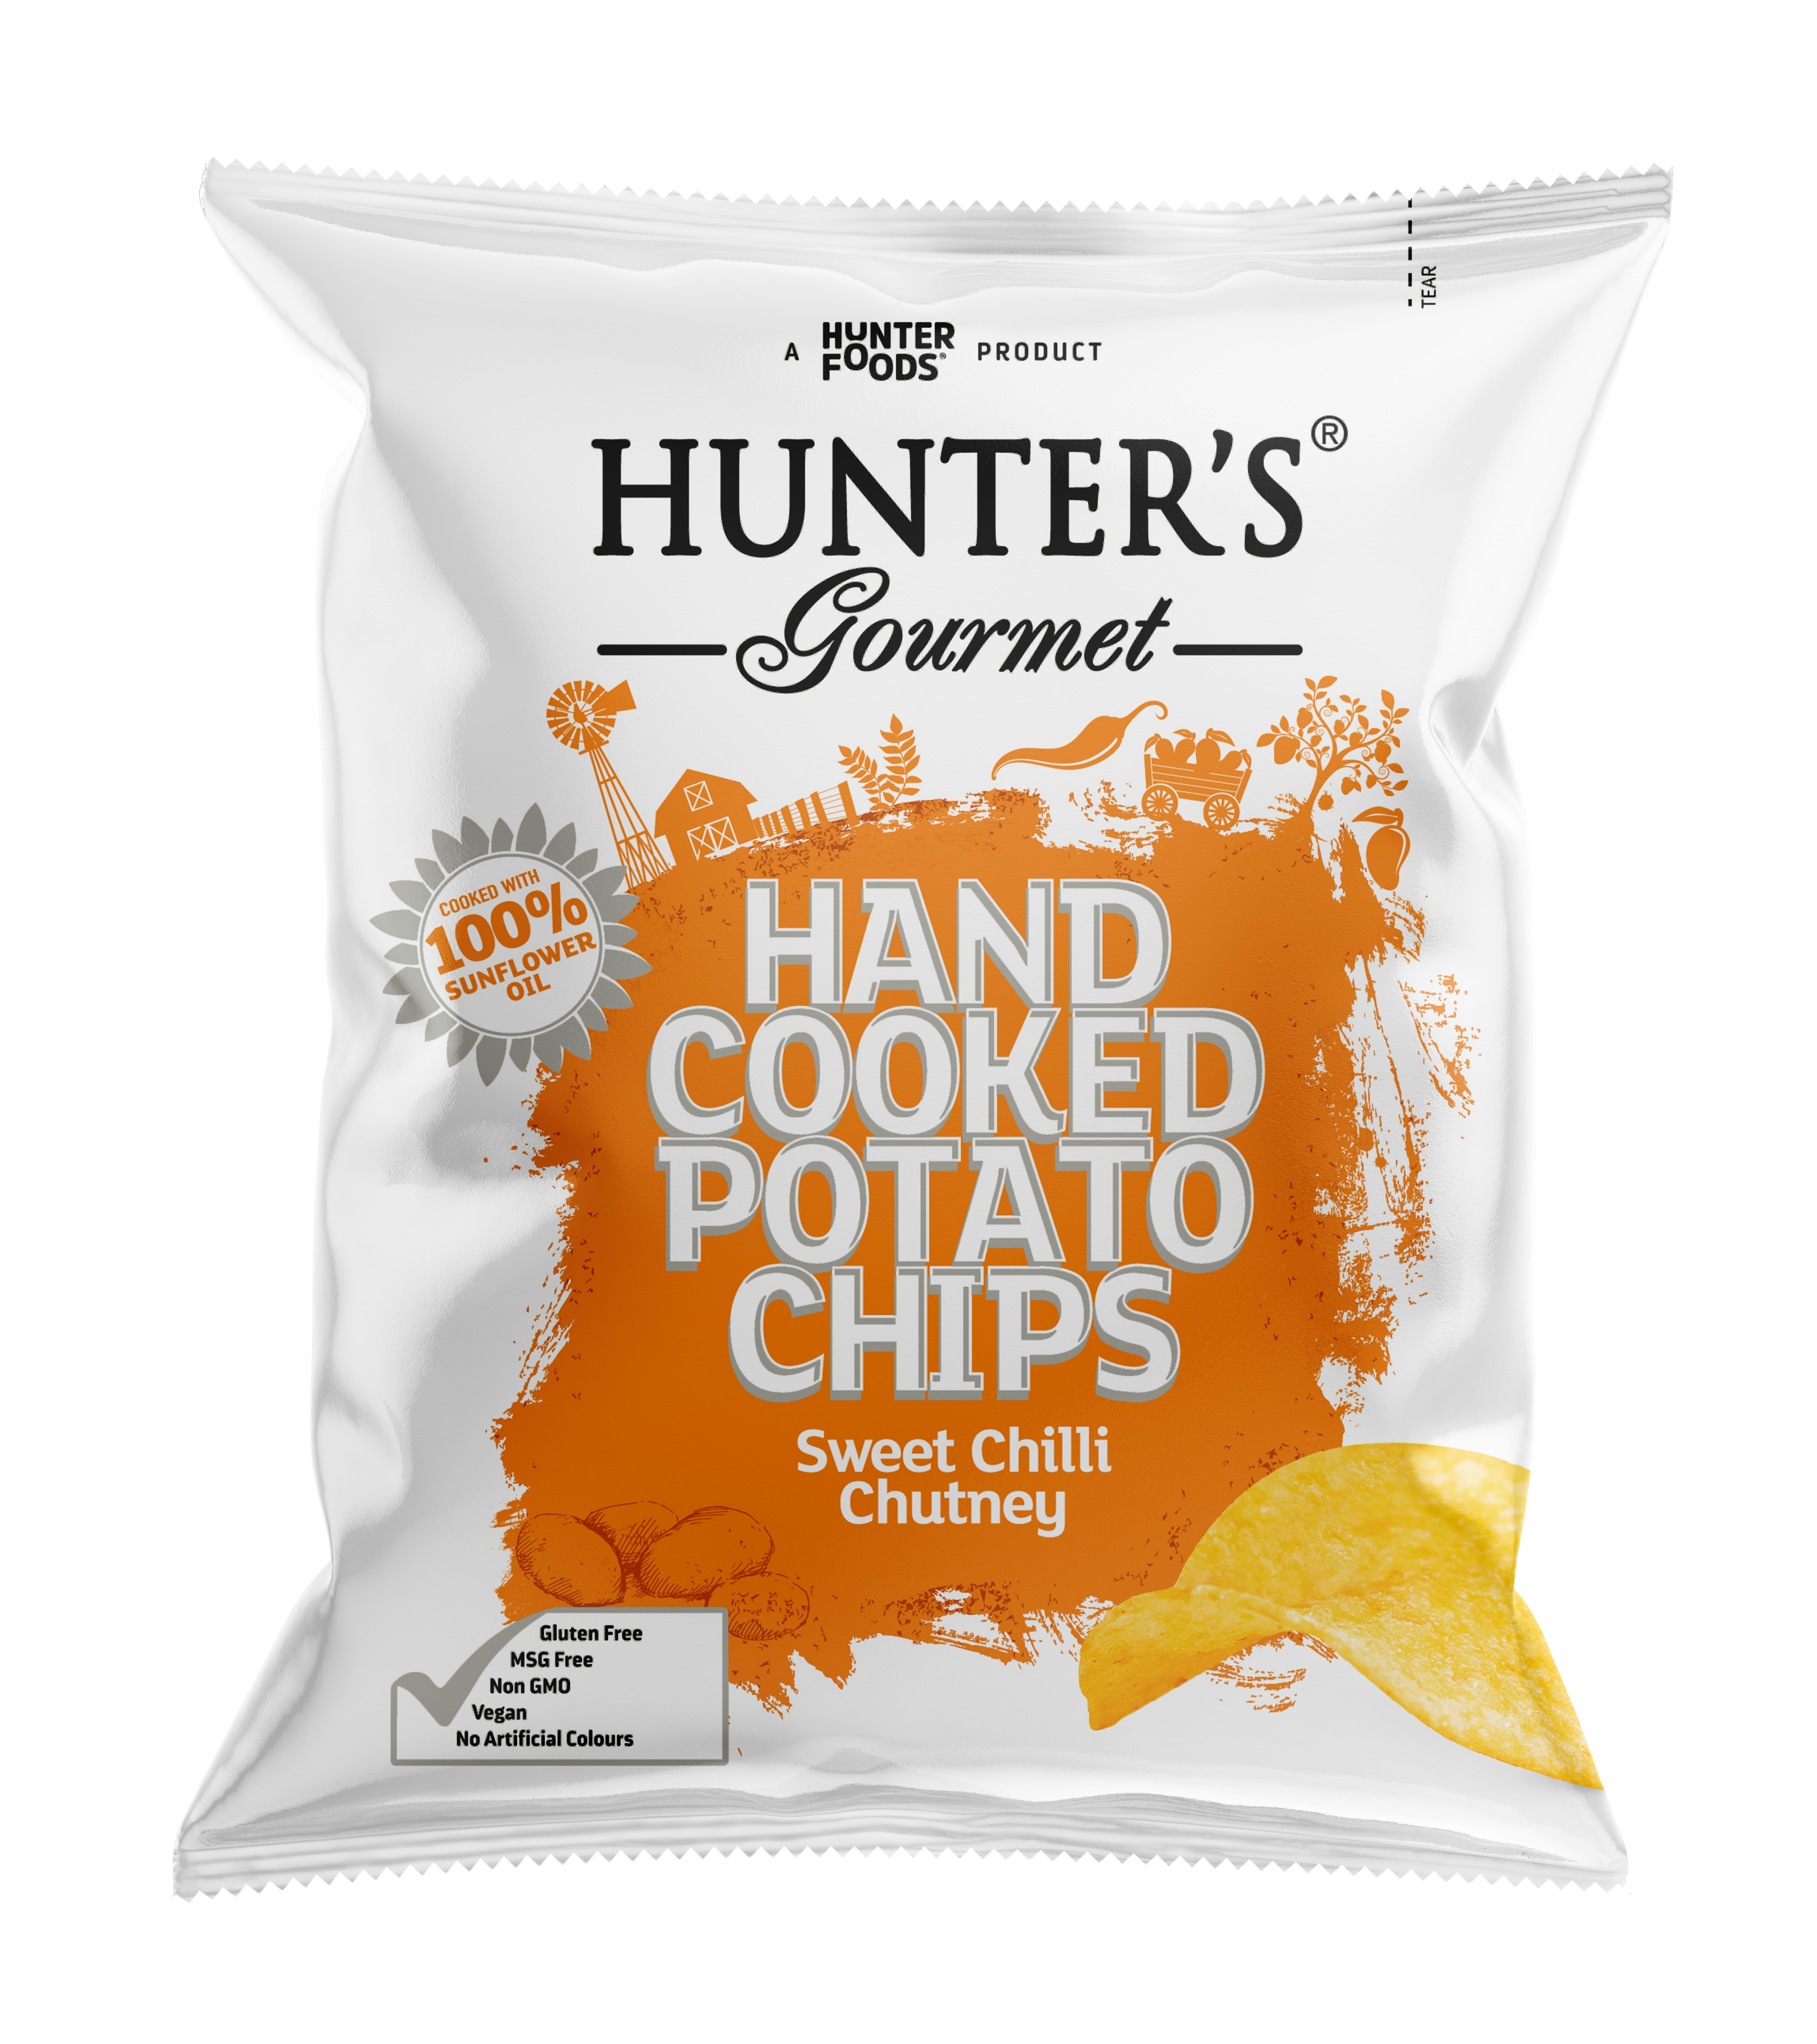 Hunter's Gourmet Hand Cooked Potato Chips Sweet Chilli Chutney 24 units per case 40 g